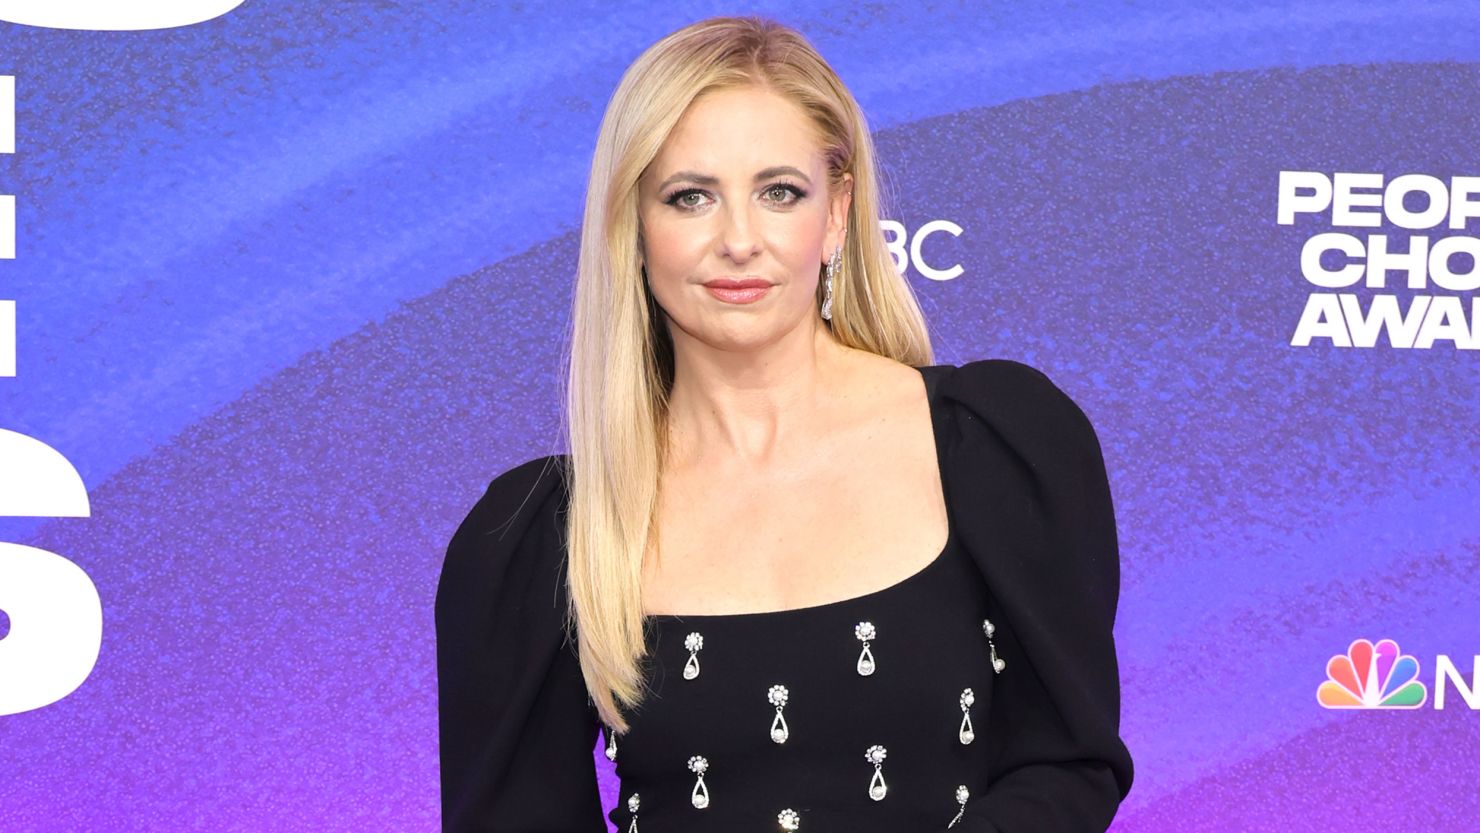 Sarah Michelle Gellar, seen here last year, is reflecting on her experience in the industry ahead of the premiere of her new show.